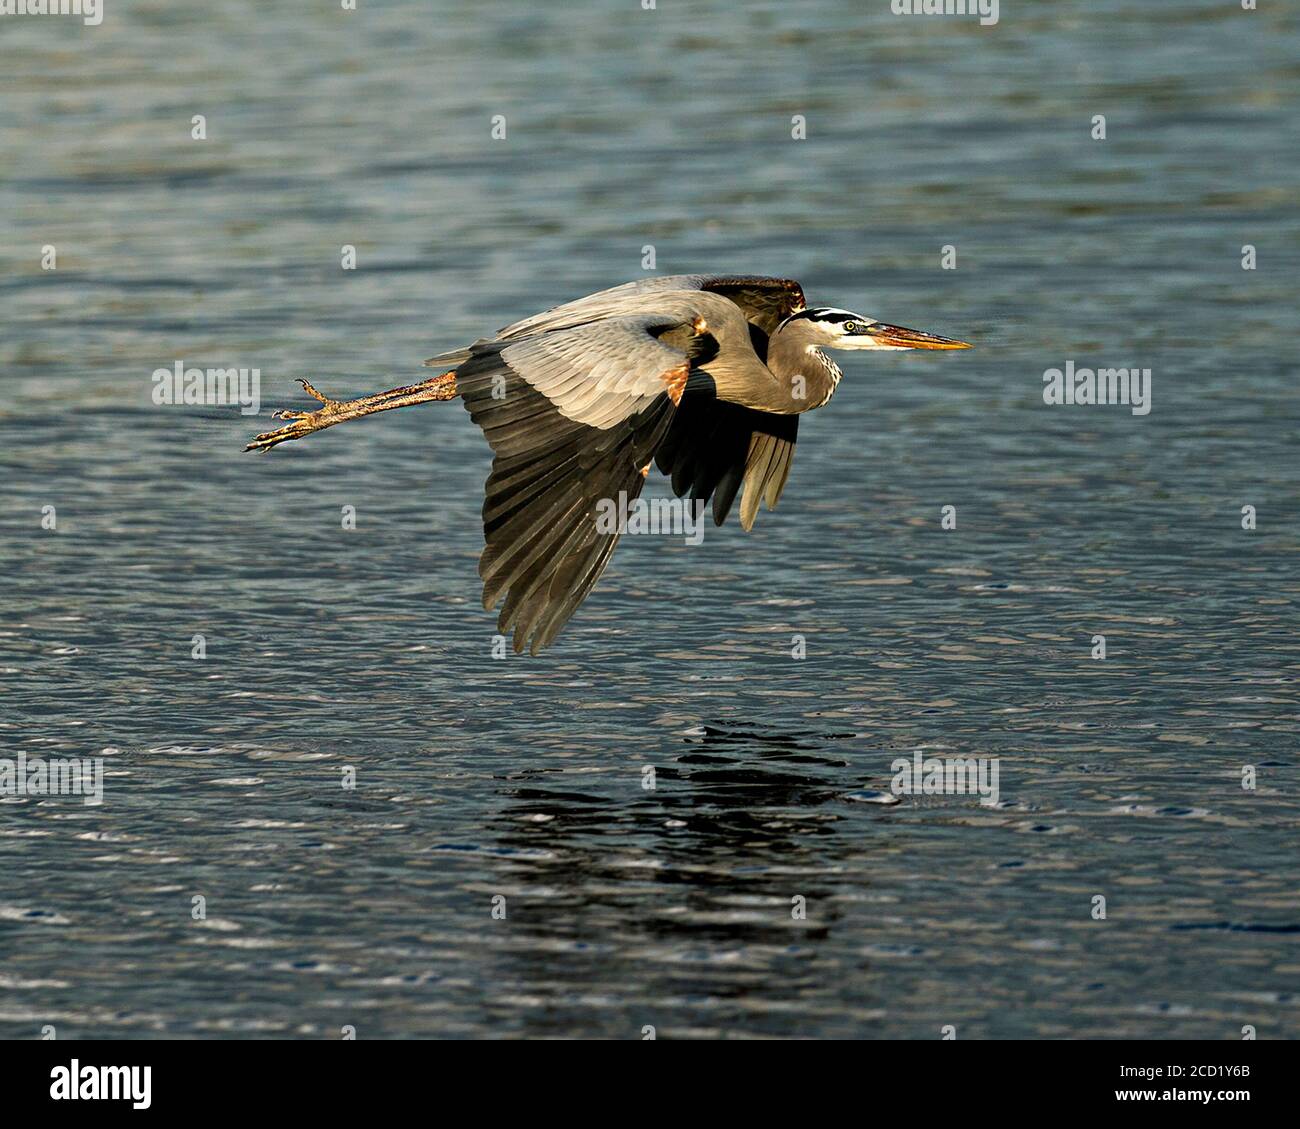 Blue Heron flying over water displaying its spread wings, blue feather plumage, beak, eye, legs in its environment and habitat. Stock Photo